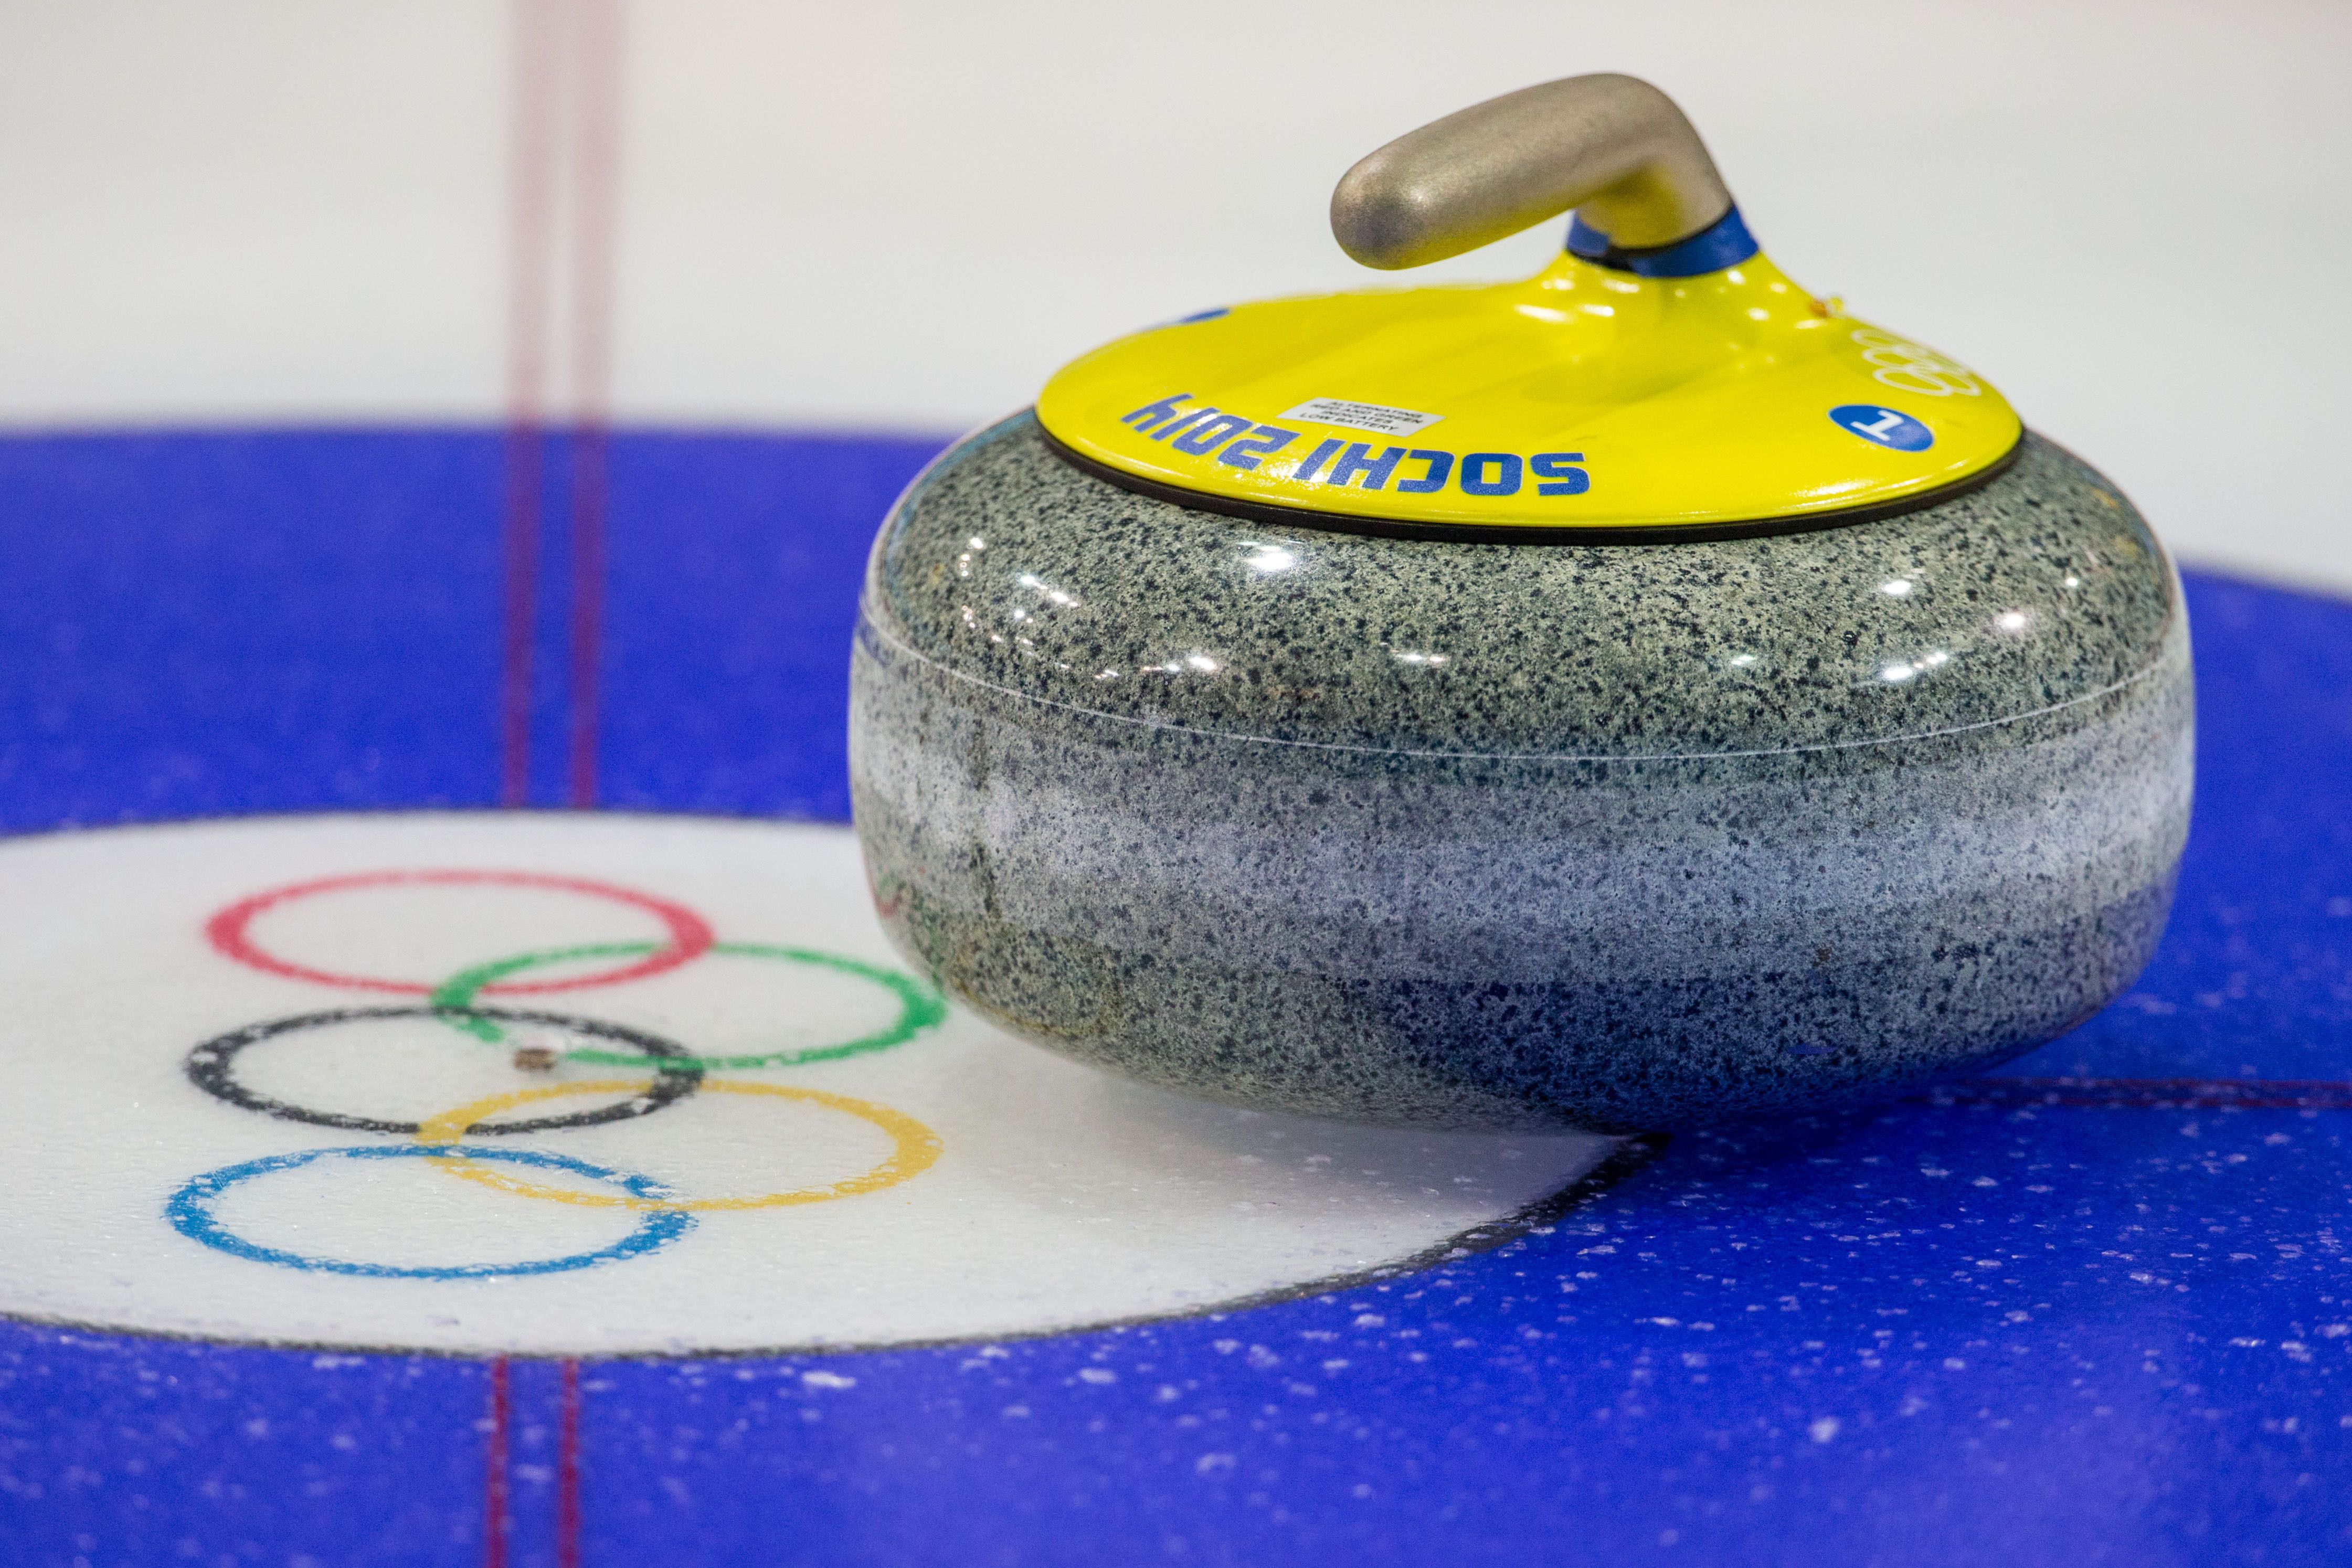 Stone for curling at the Olympics in Sochi wallpaper and image